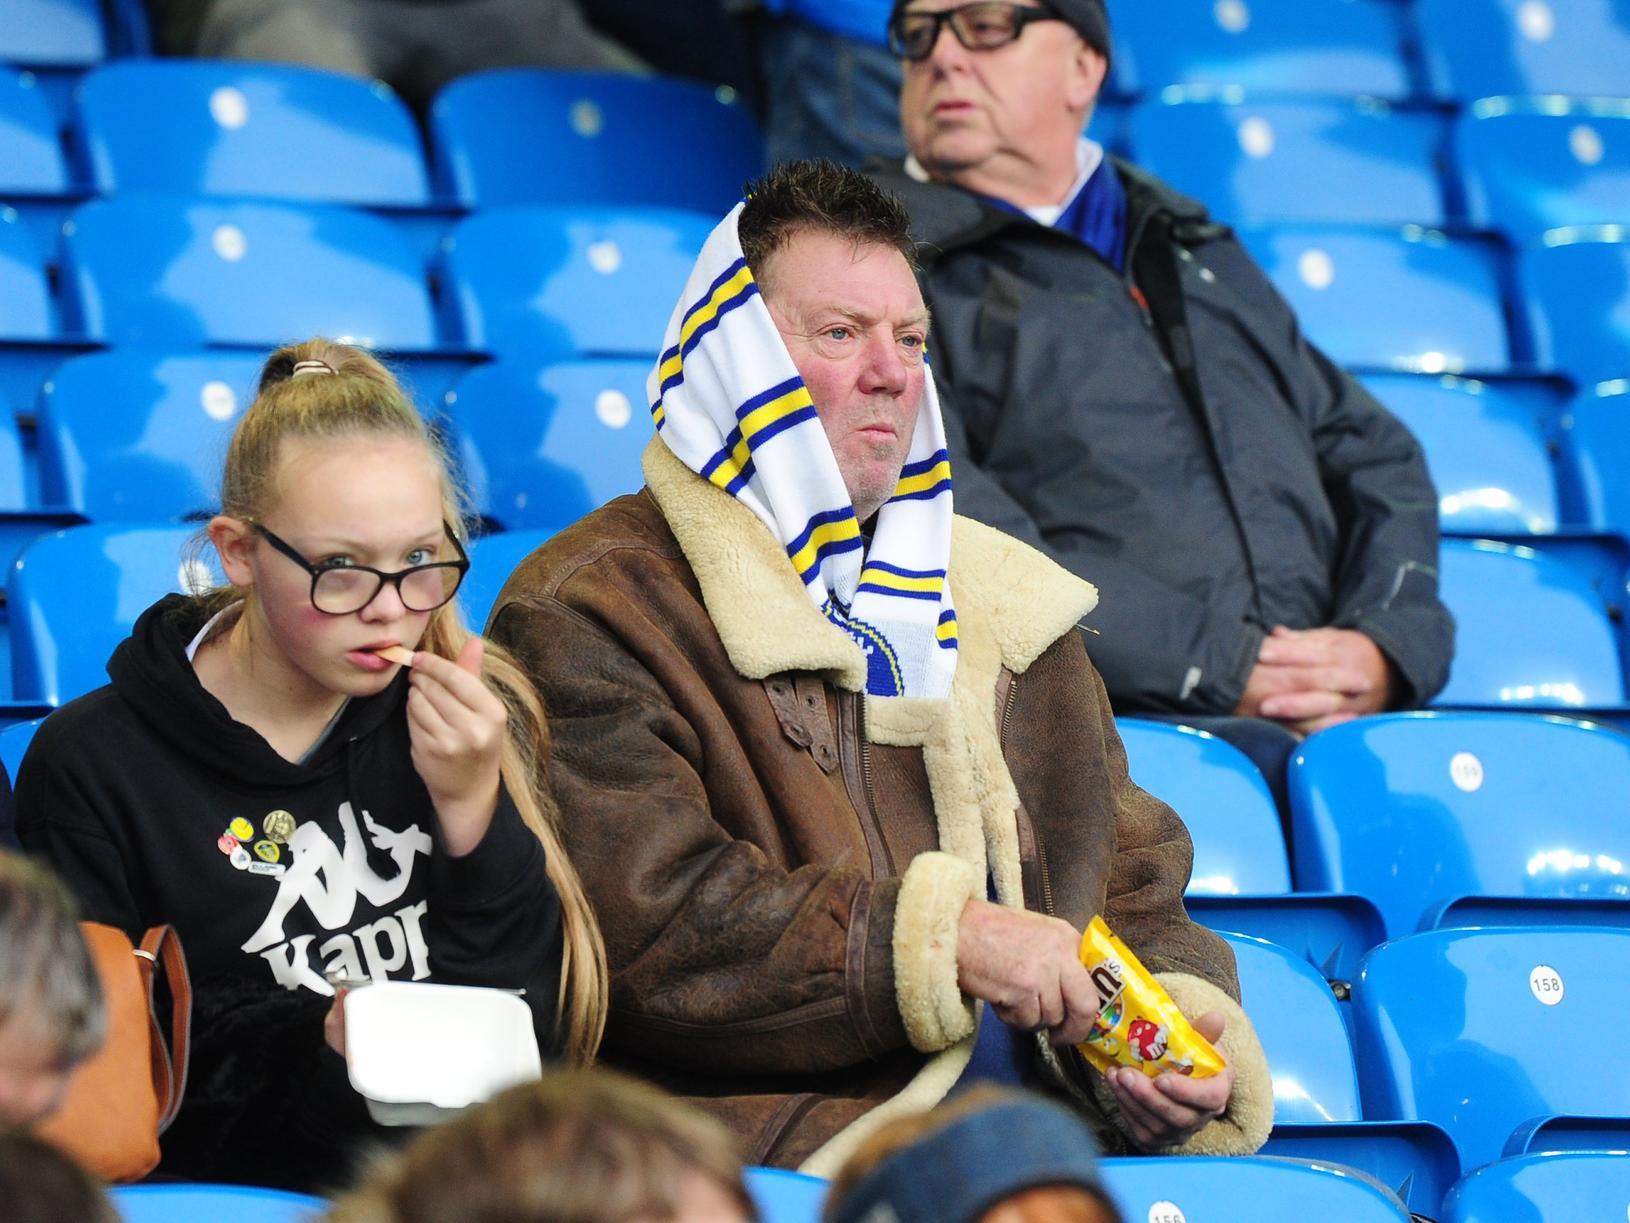 These two fans tuck into some snacks during the game.